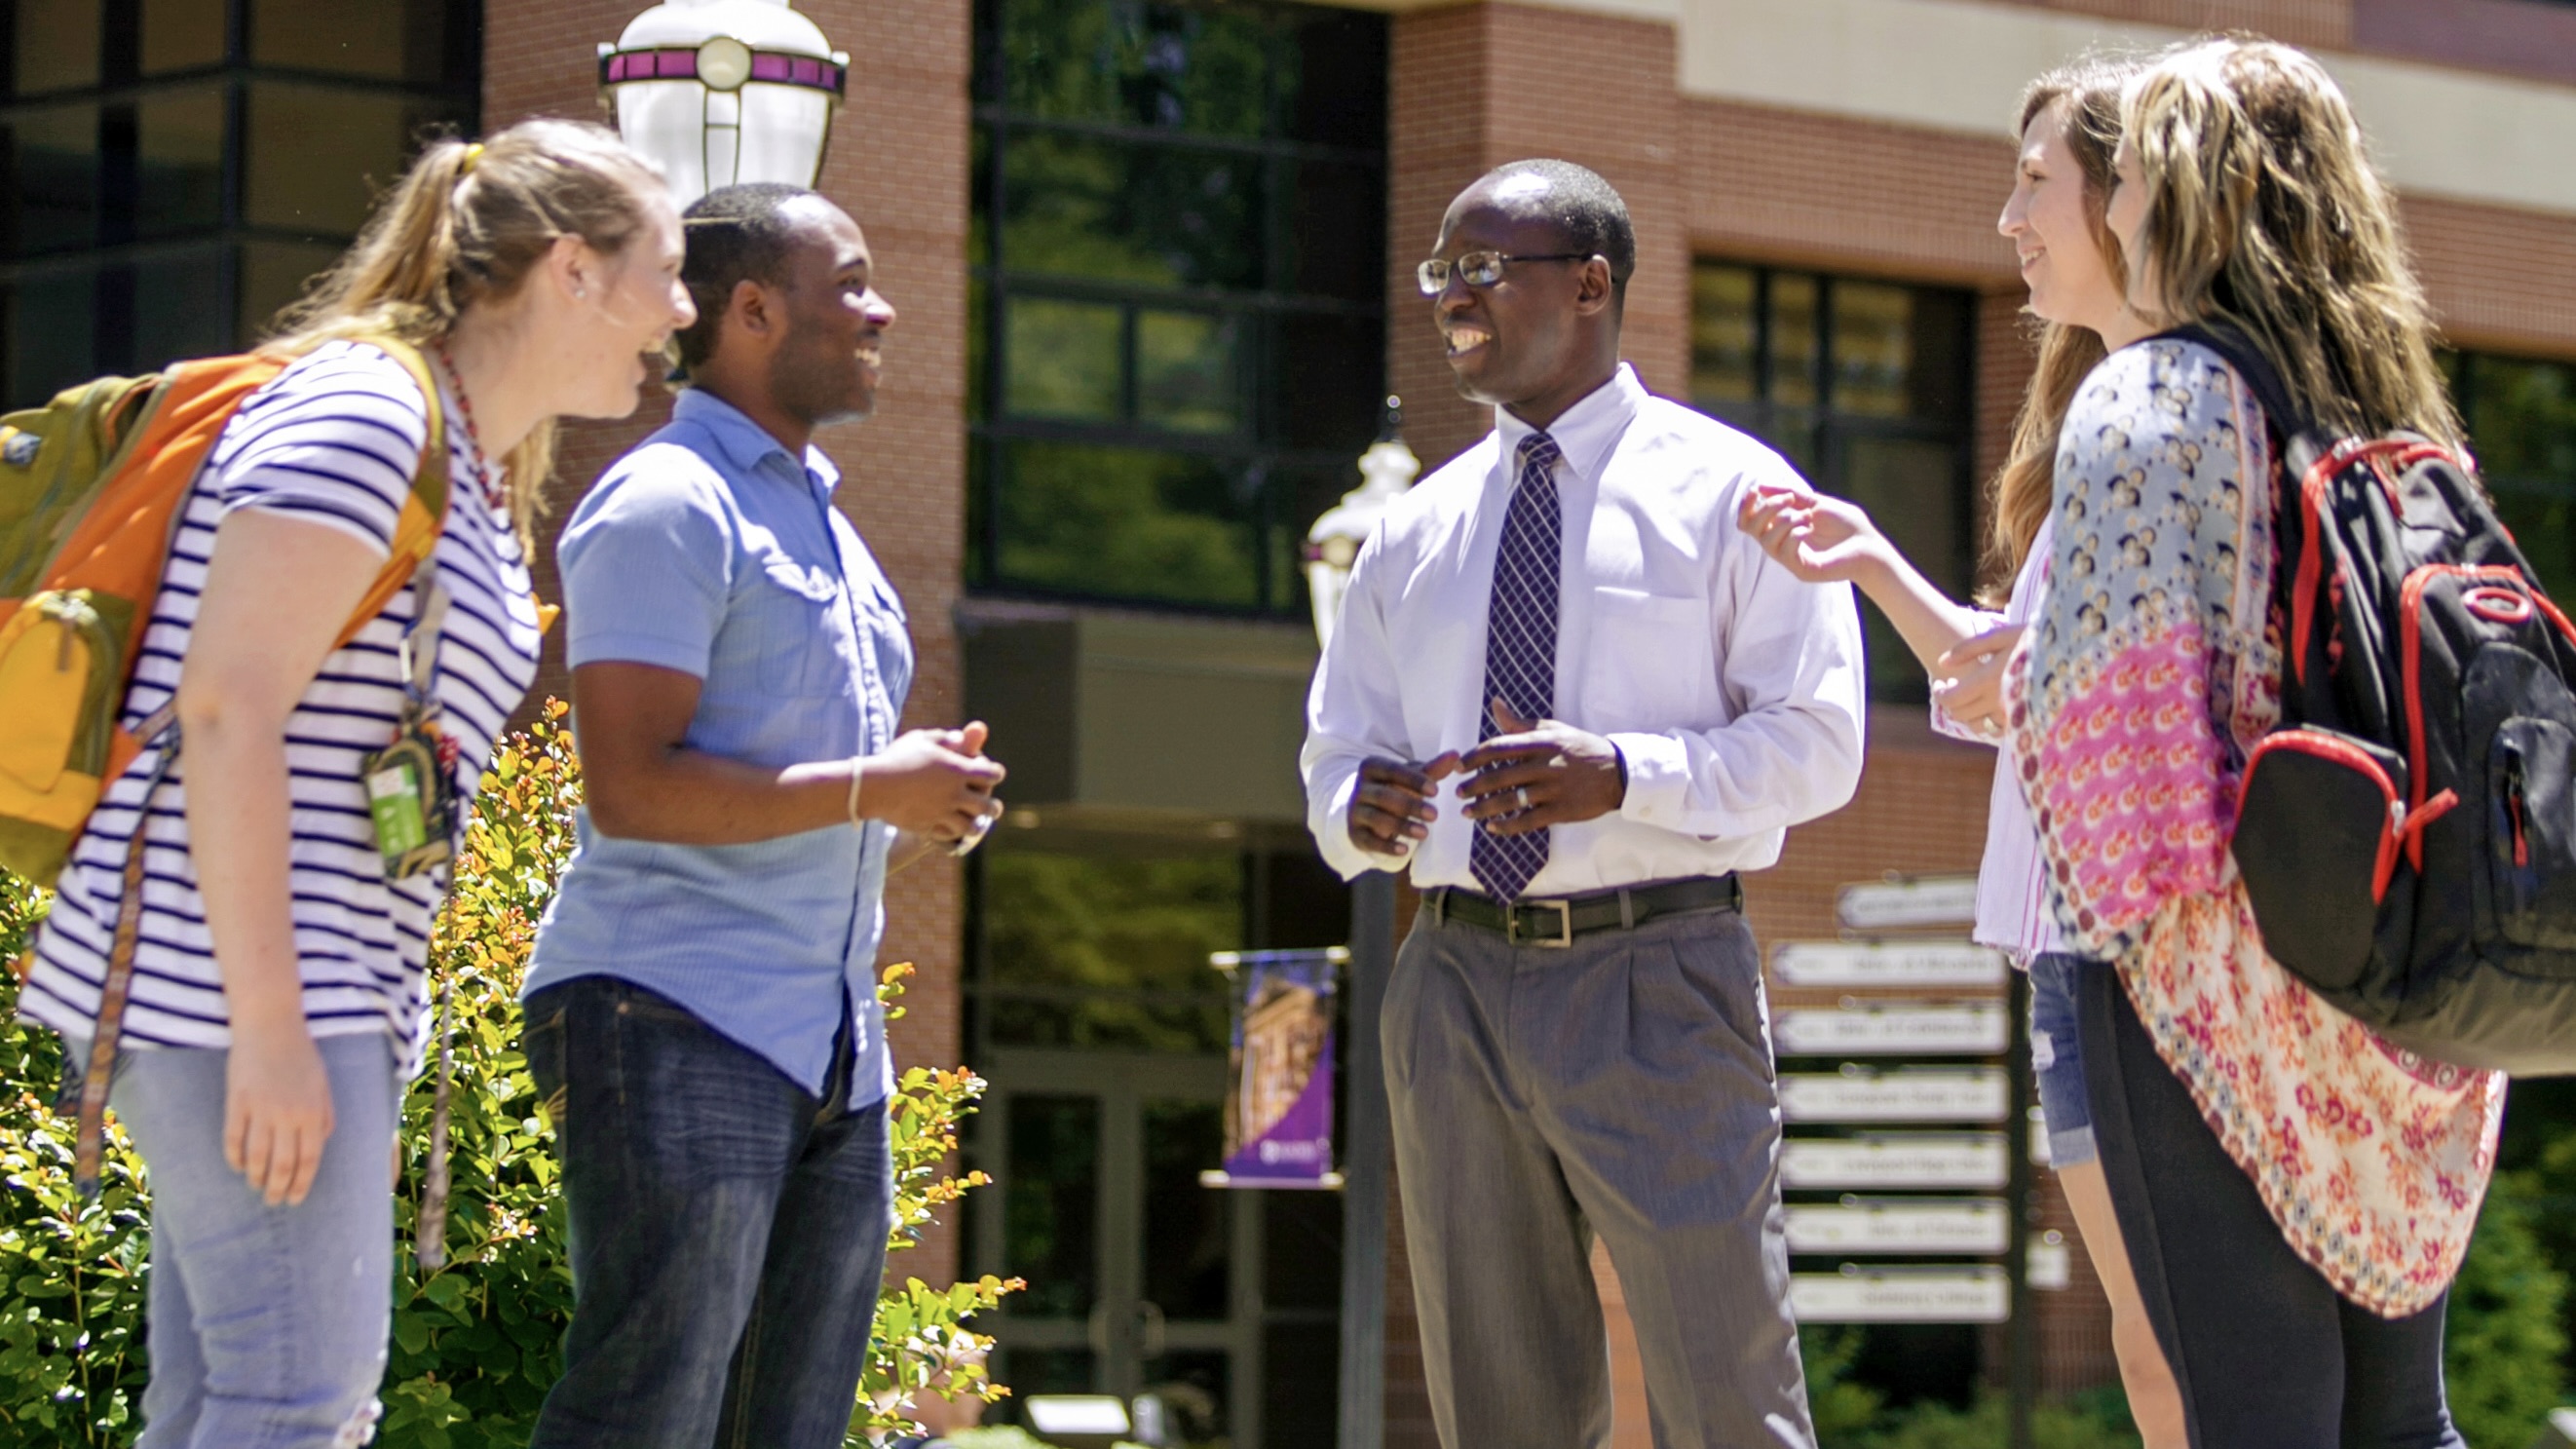 Dr. Rickey Rogers visits with students at Ouachita Baptist University